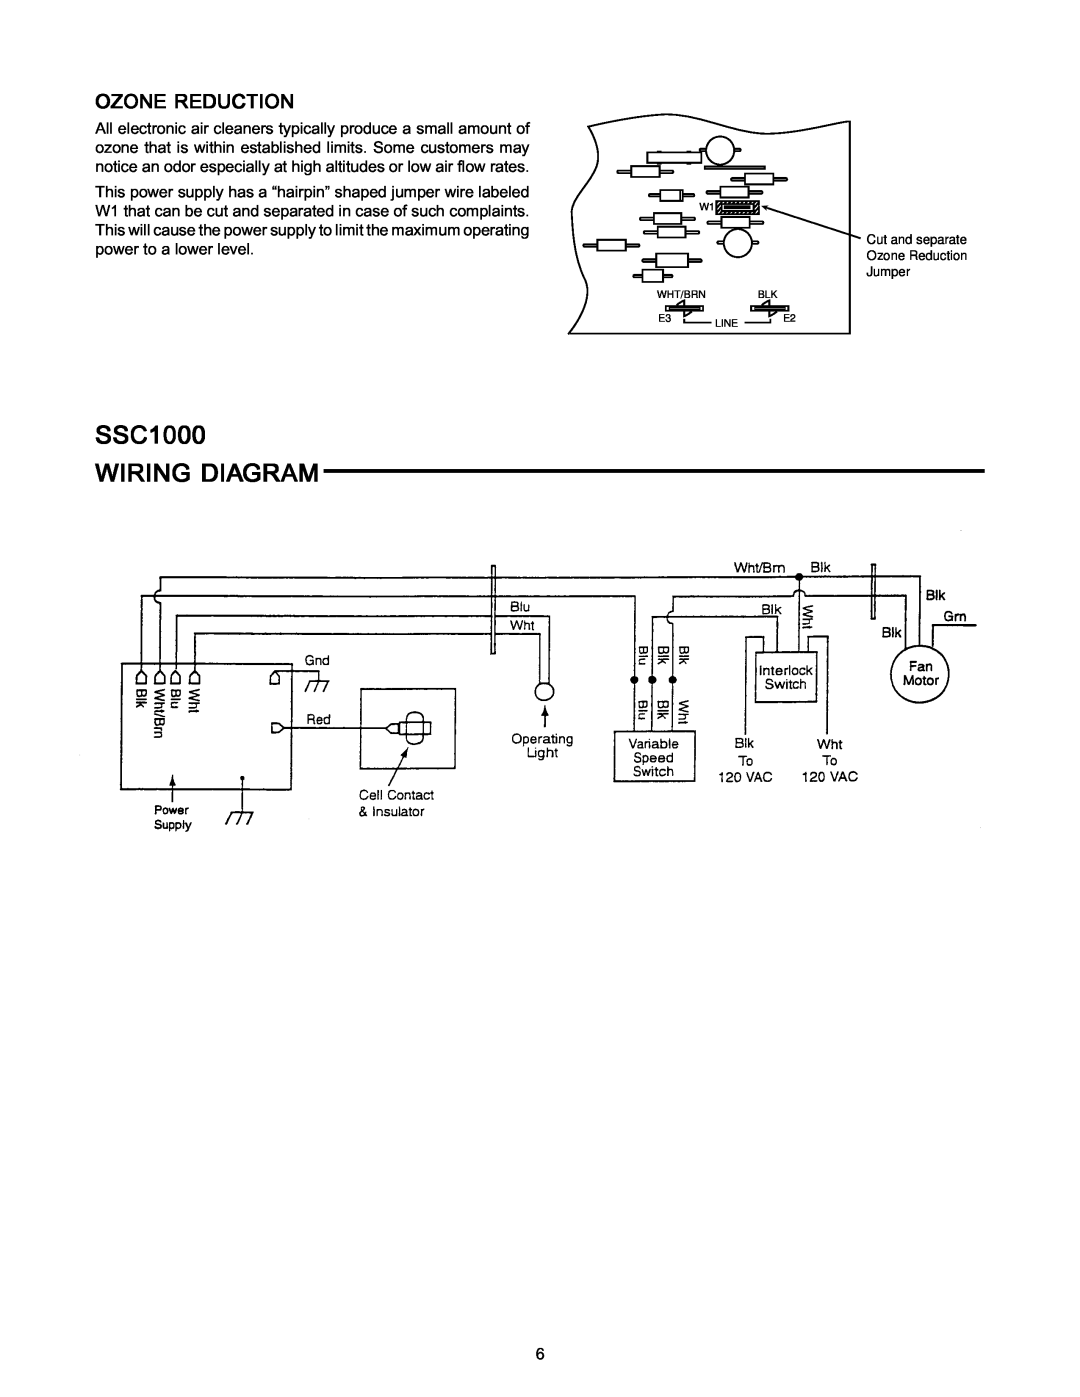 White Rodgers manual SSC1000 WIRING DIAGRAM, Ozone Reduction 